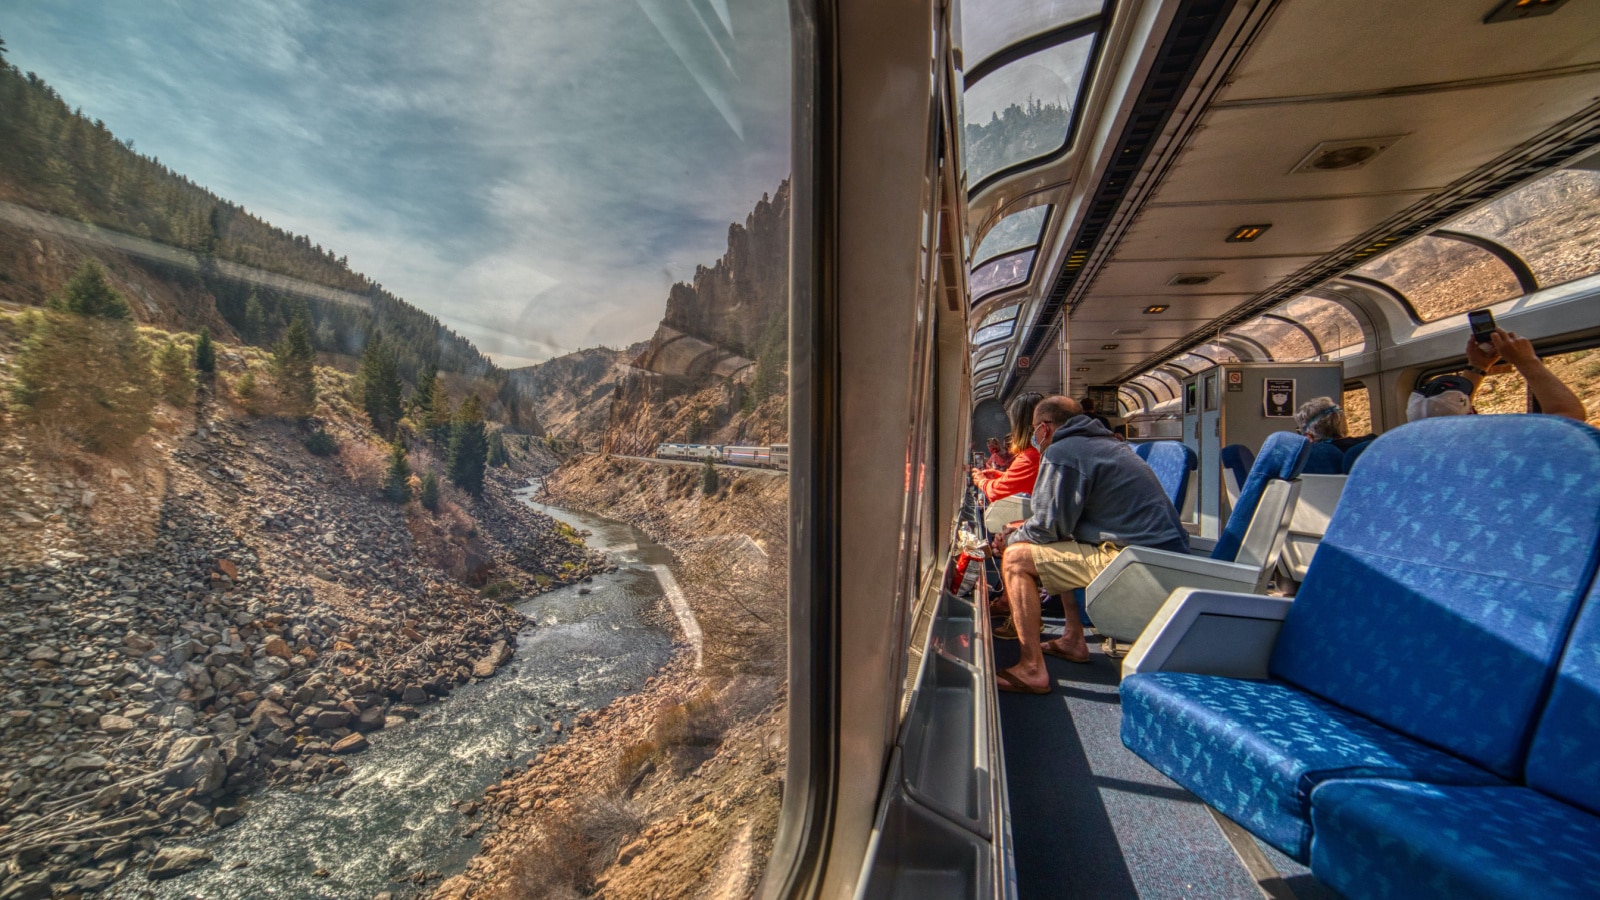 The World’s 10 Greatest Train Journeys To Add to Your Bucket List